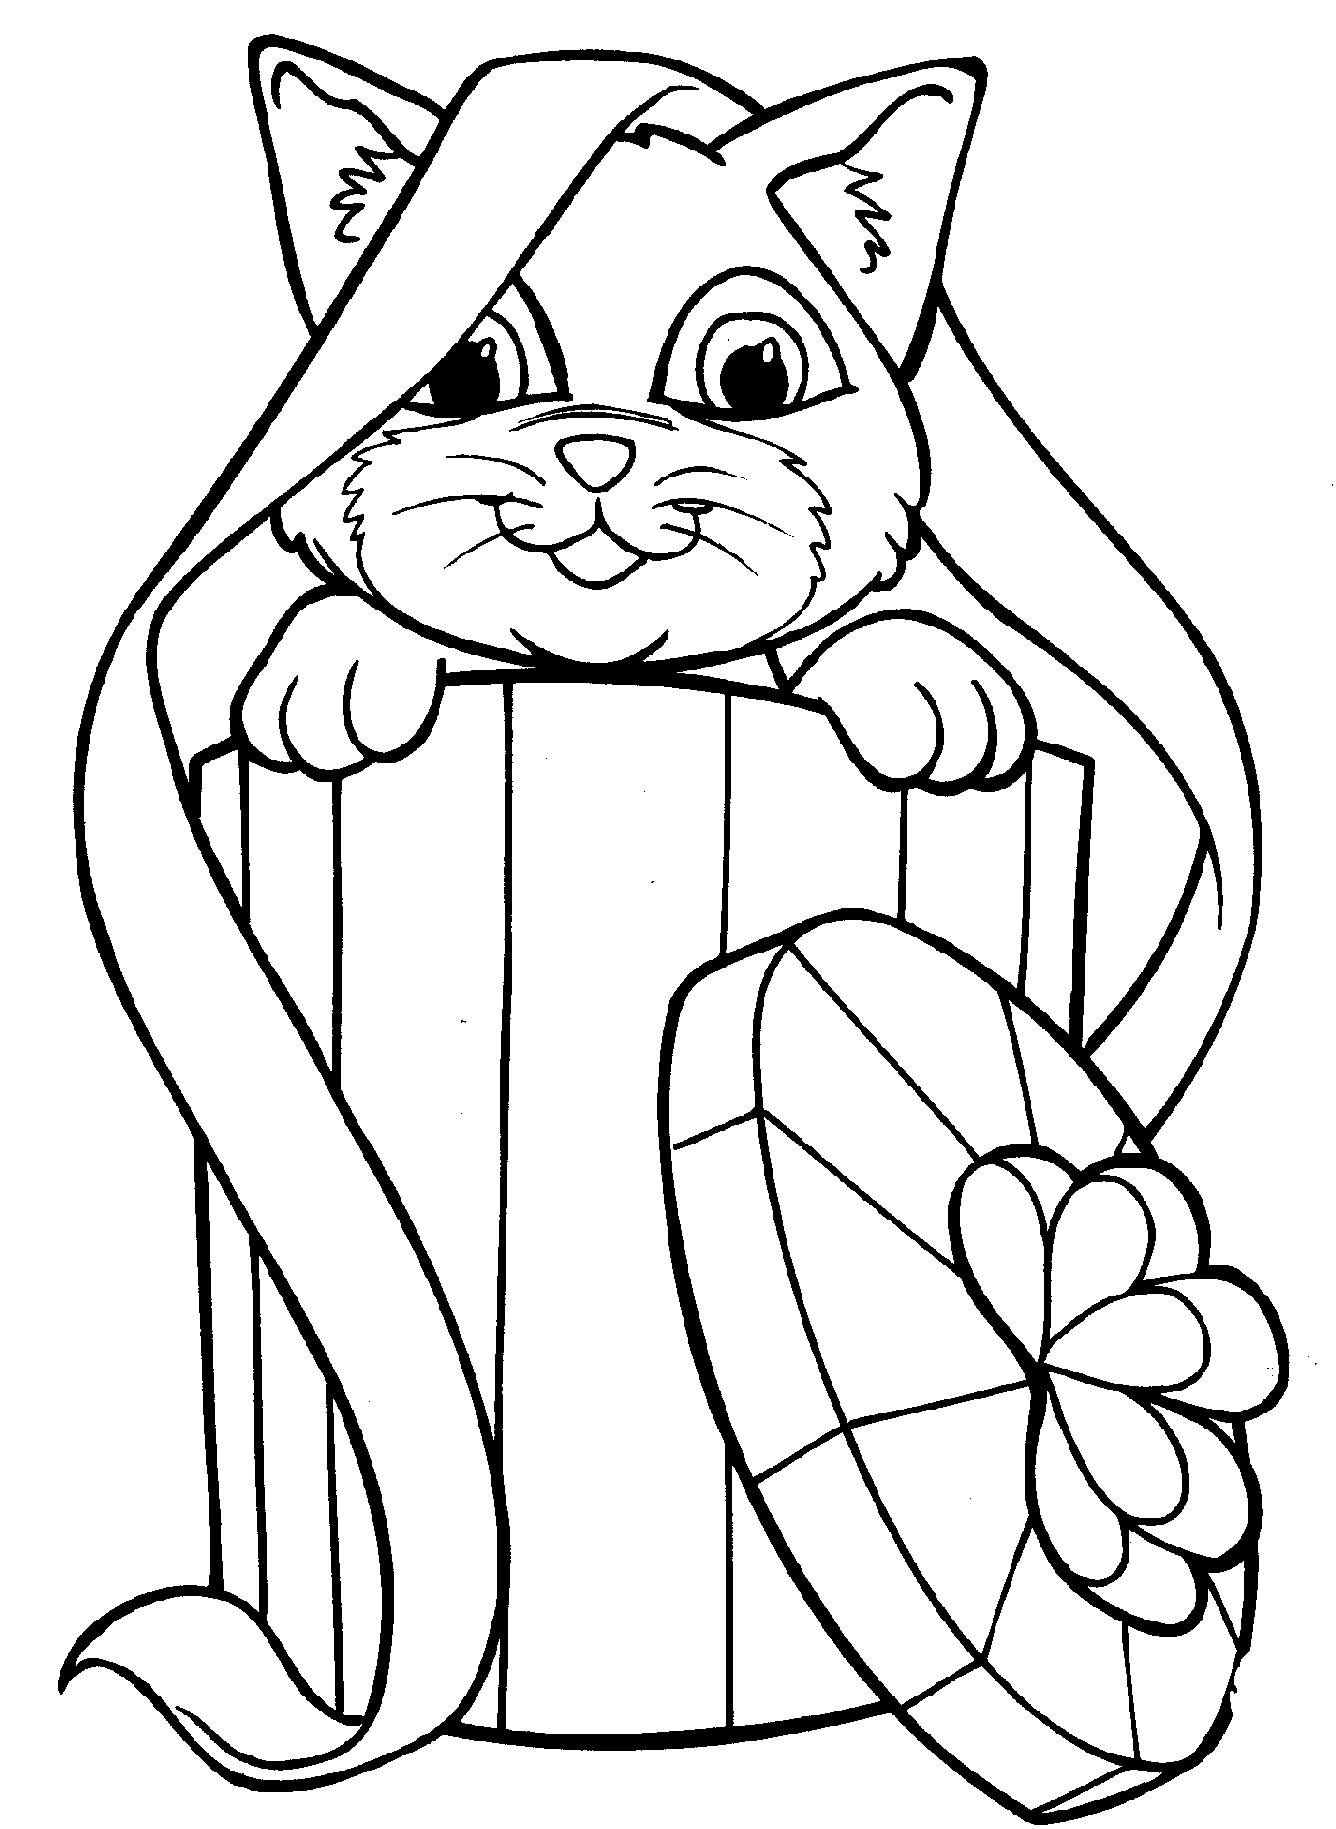 Kitten Coloring Pages For Kids
 Free Printable Kitten Coloring Pages For Kids Best